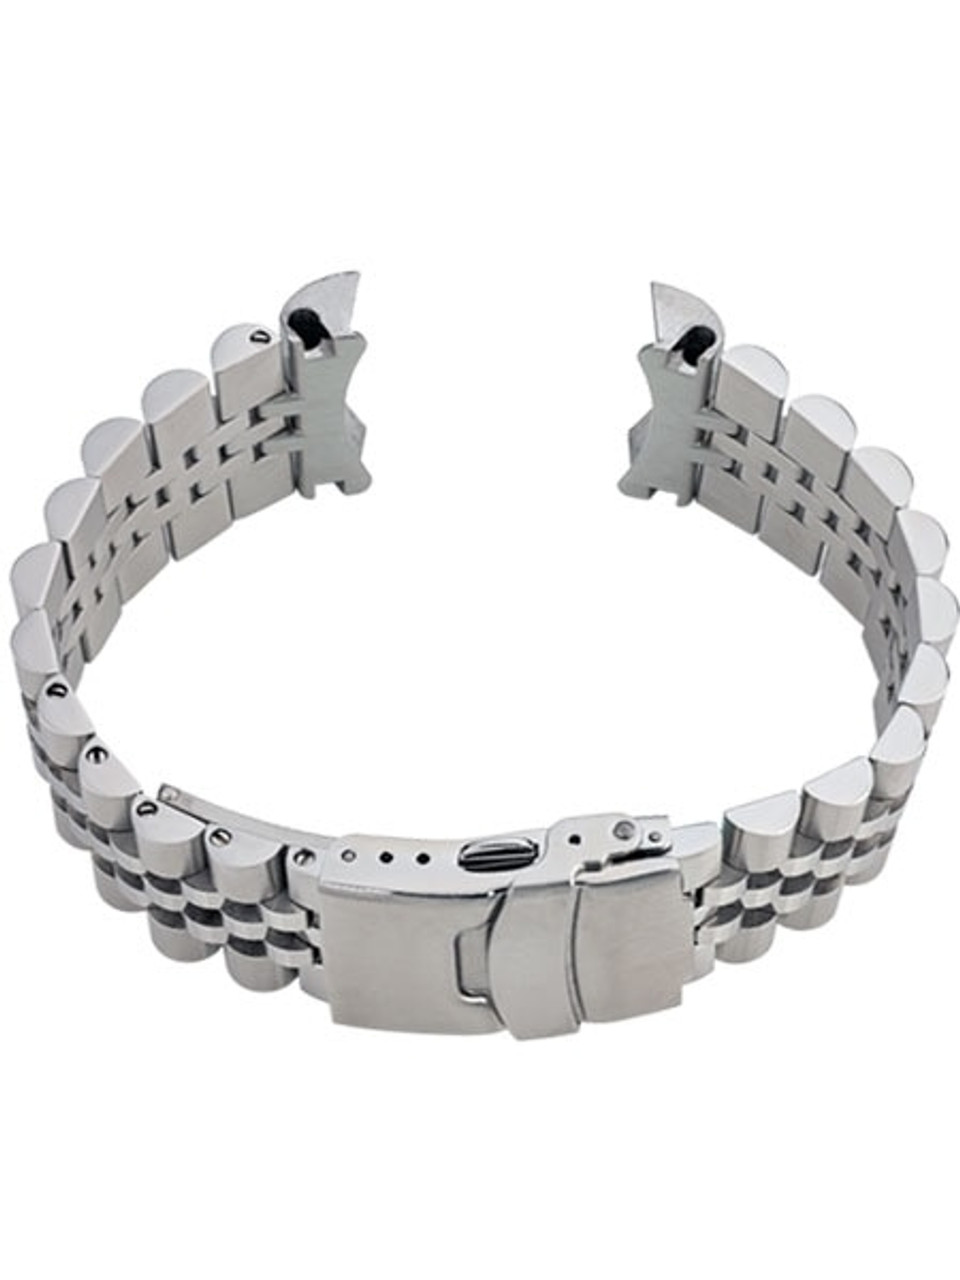 Islander Brushed and Polished Stainless Steel Bracelet for Seiko 5 watches  SRPE51, 53, 55, 57, 61,63, 67 watches. #BRAC-10 (20mm)